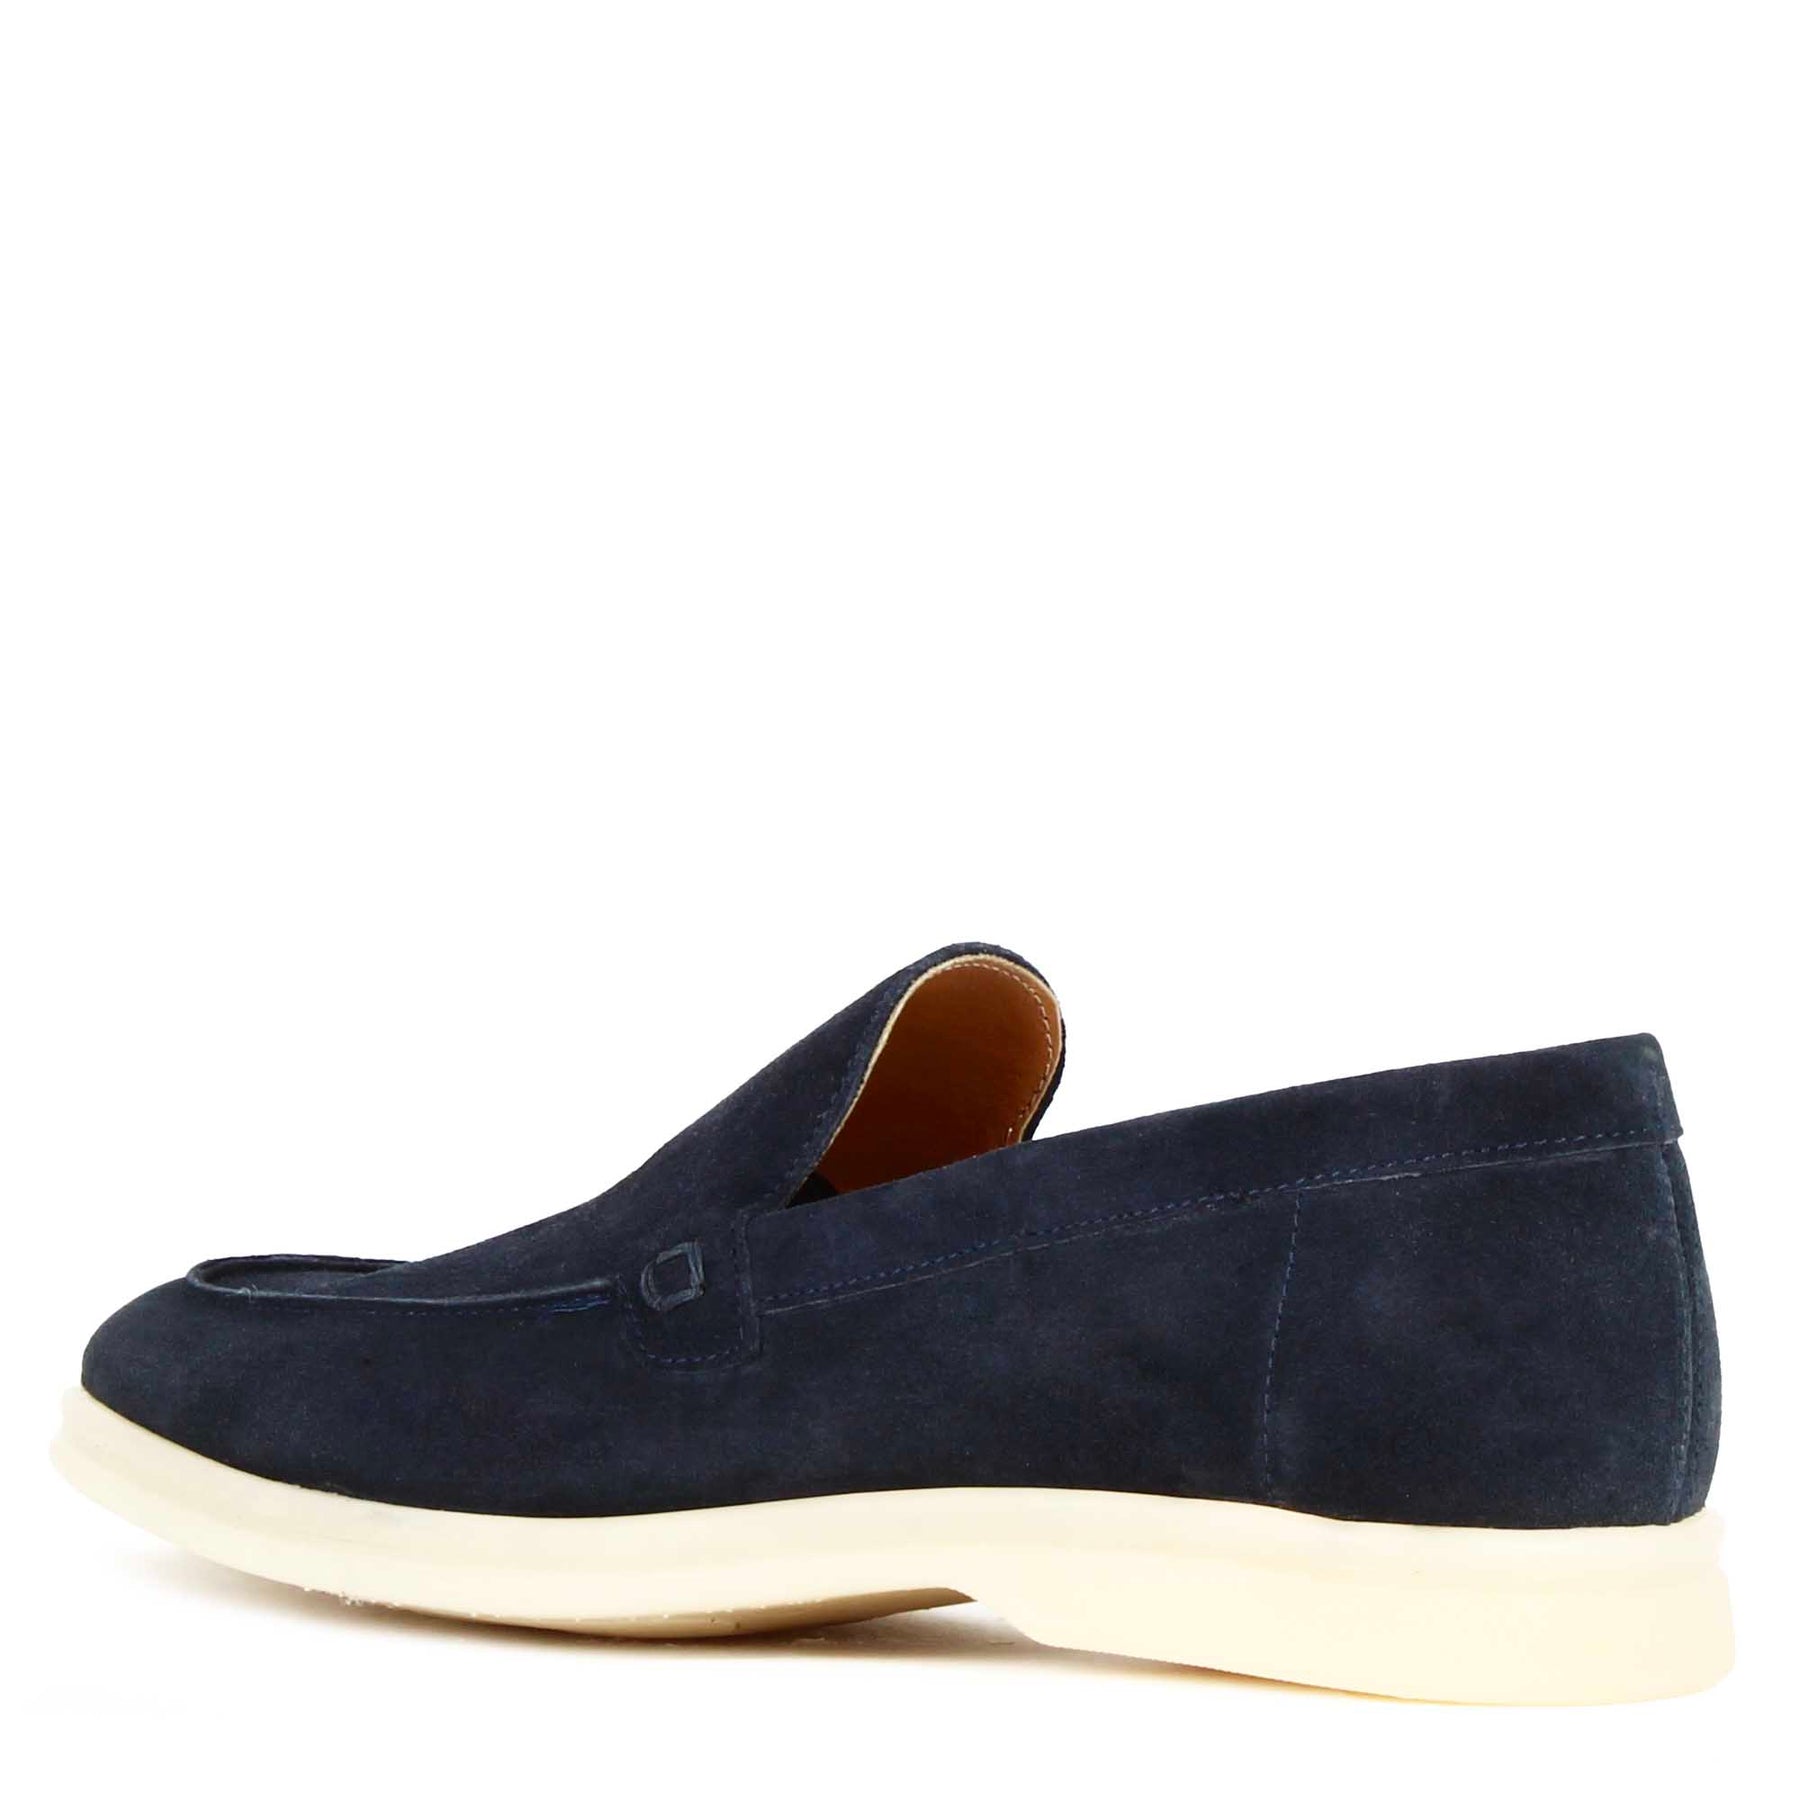 Casual men's moccasin in blue suede